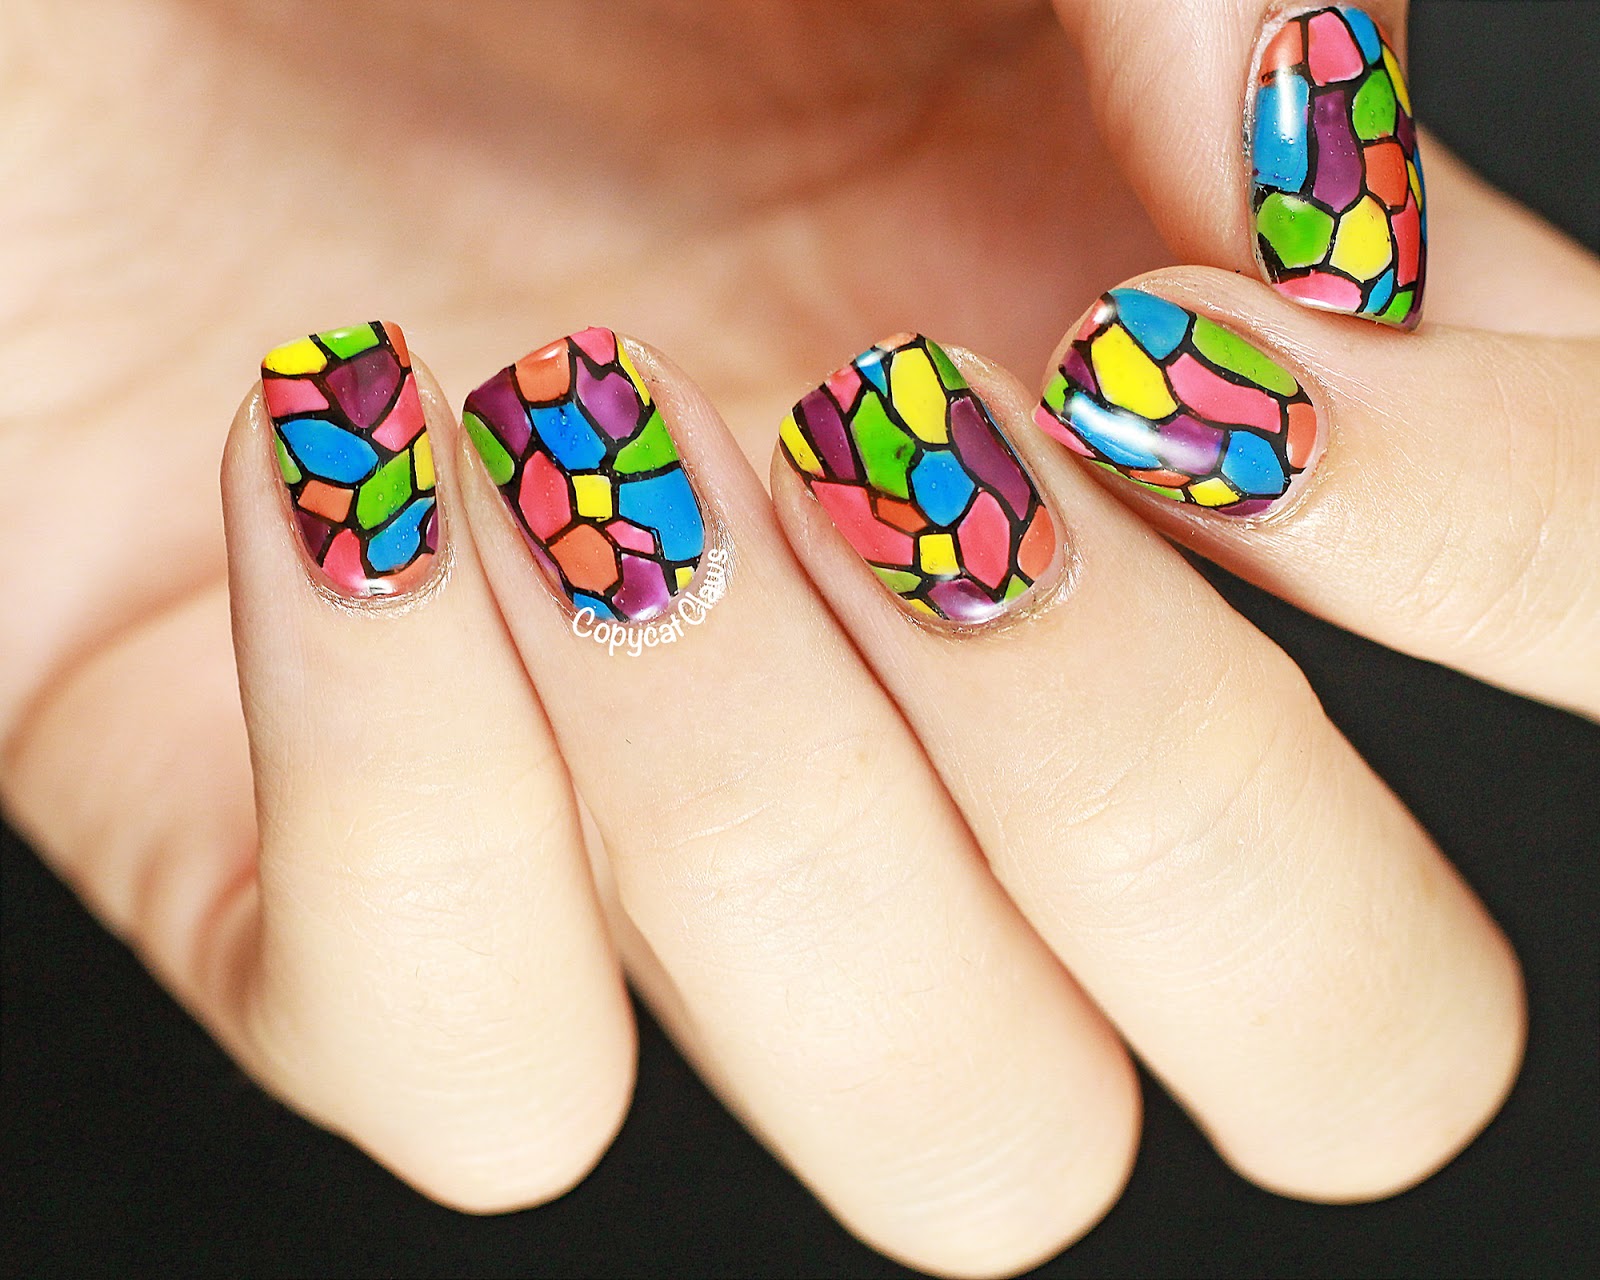 2. How to Create a Stunning Stained Glass Effect with Nail Polish - wide 2